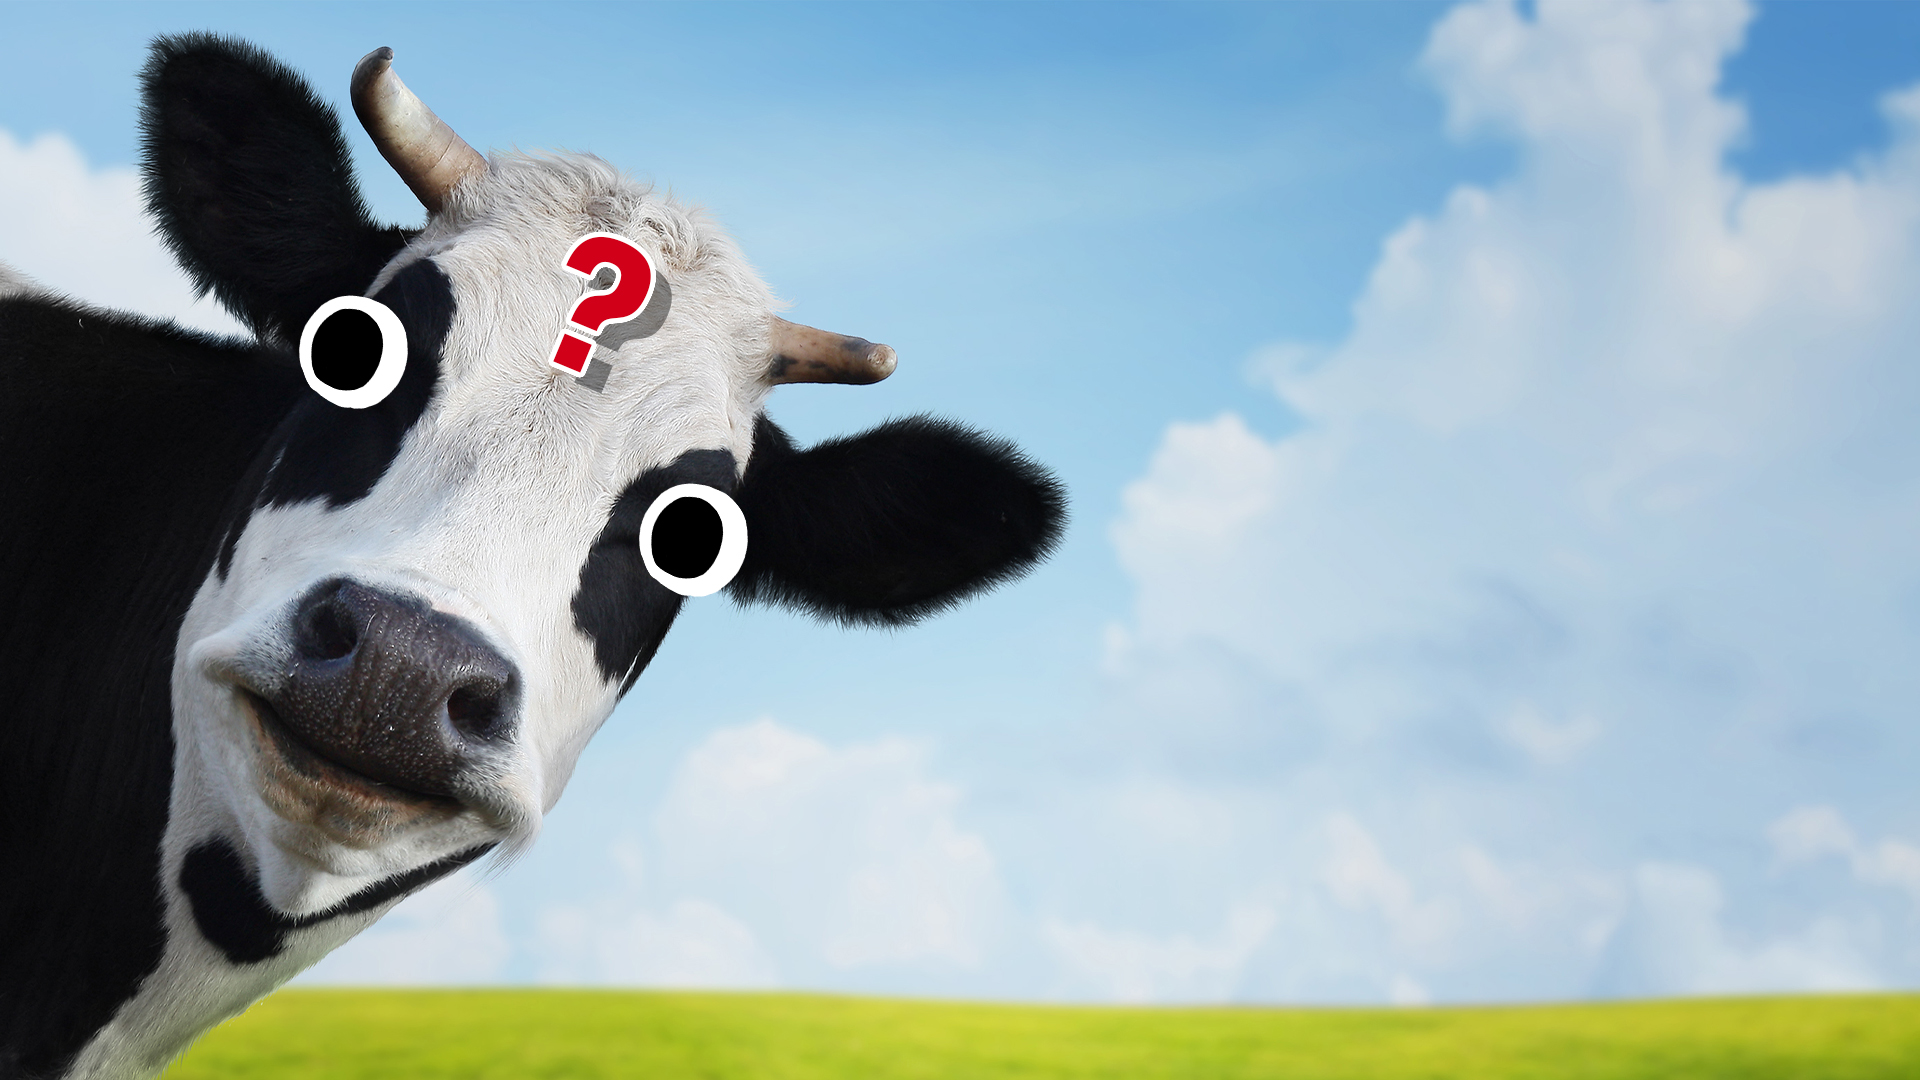 A confused cow